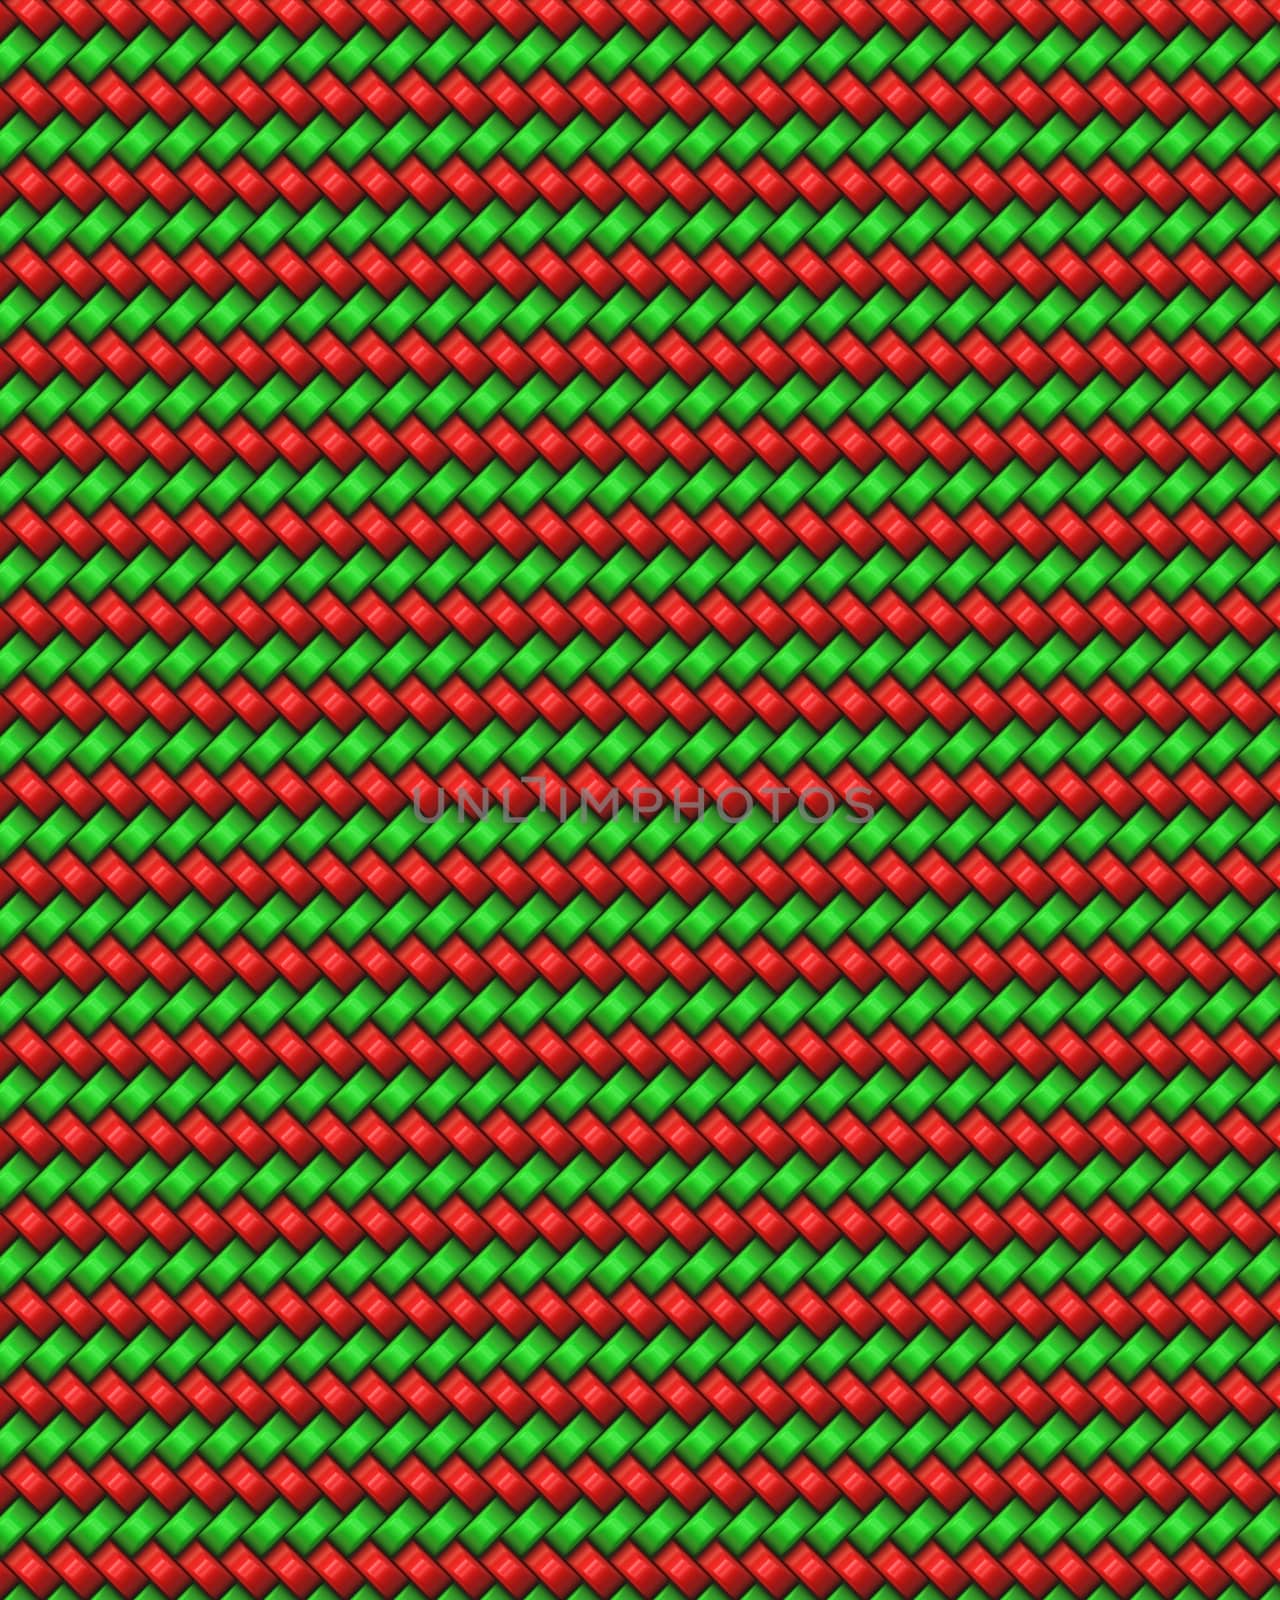 Red and green weave pattern abstract background decoration.